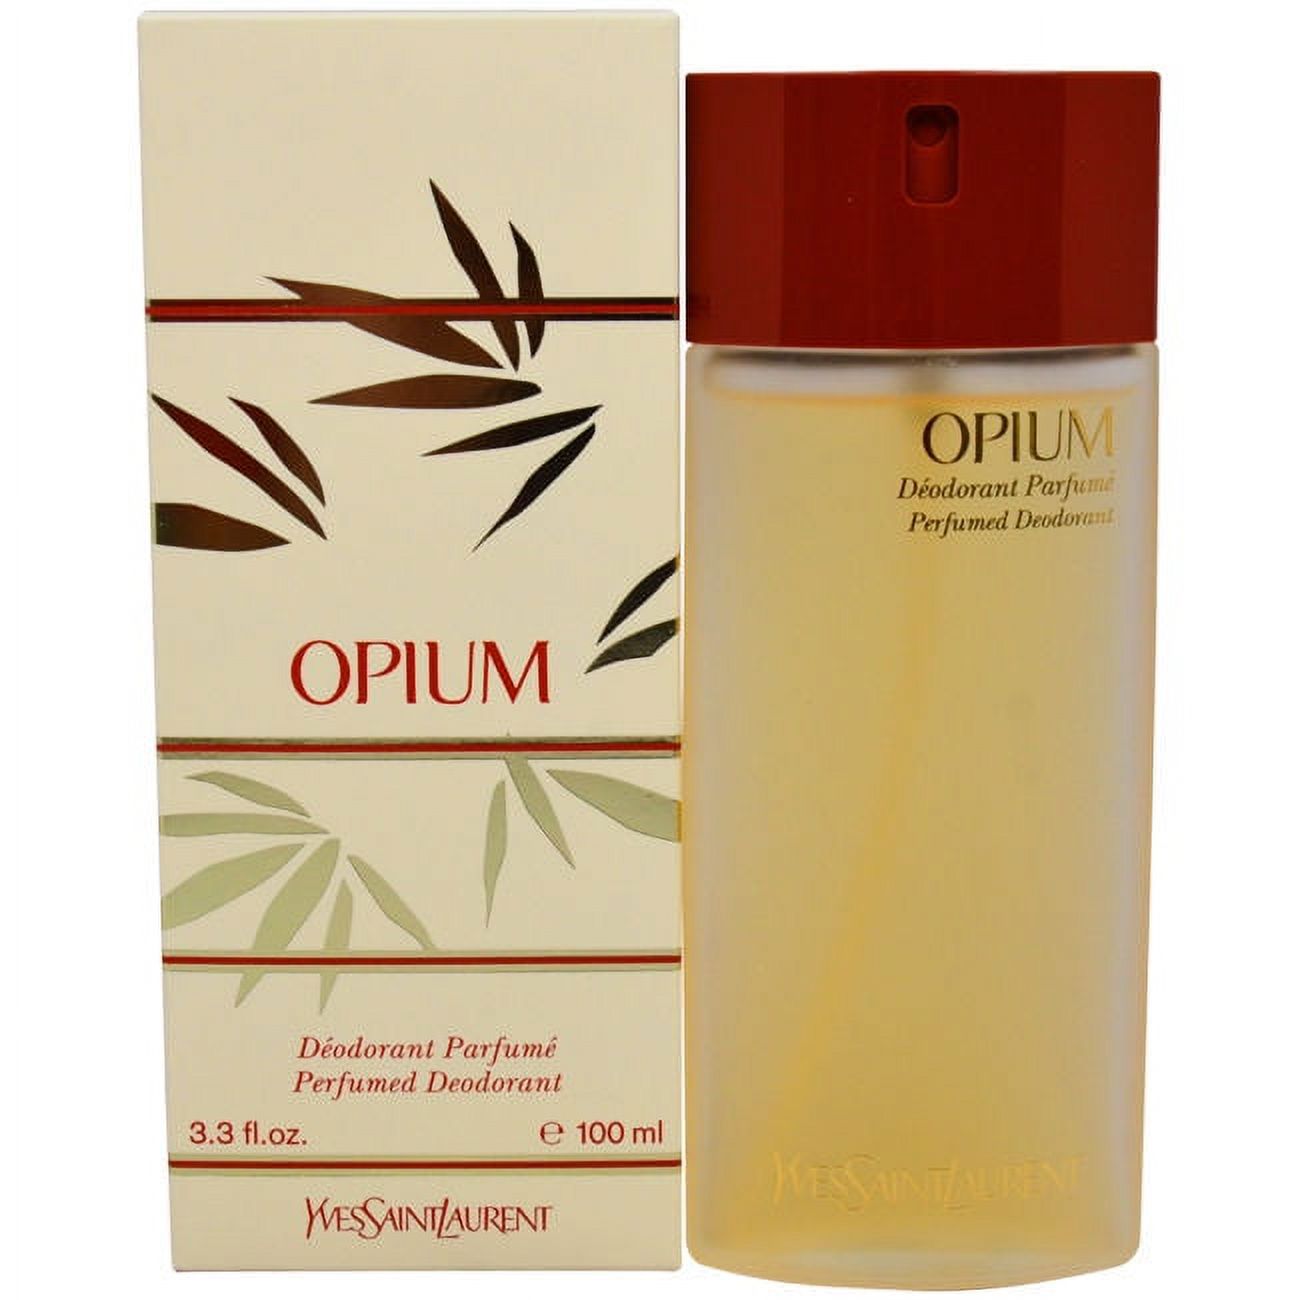 Opium For Women By Ysl 3.3 oz Perfumed Deo. - image 2 of 3